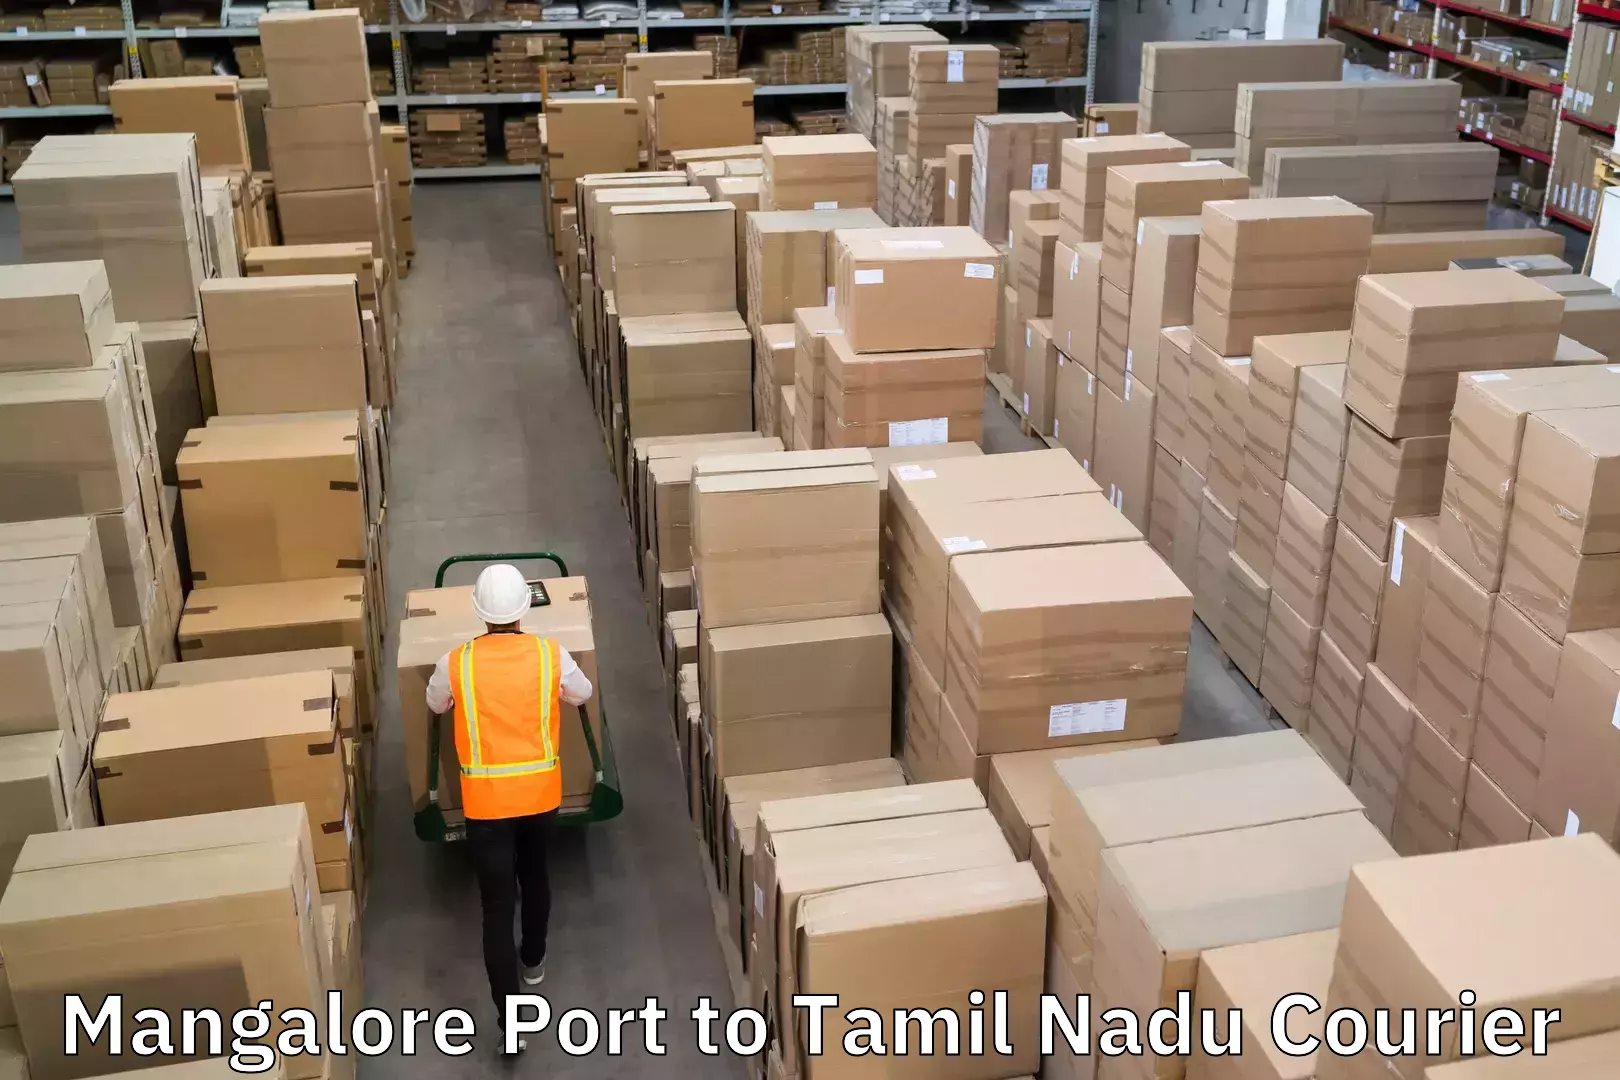 Advanced delivery network Mangalore Port to Tamil Nadu